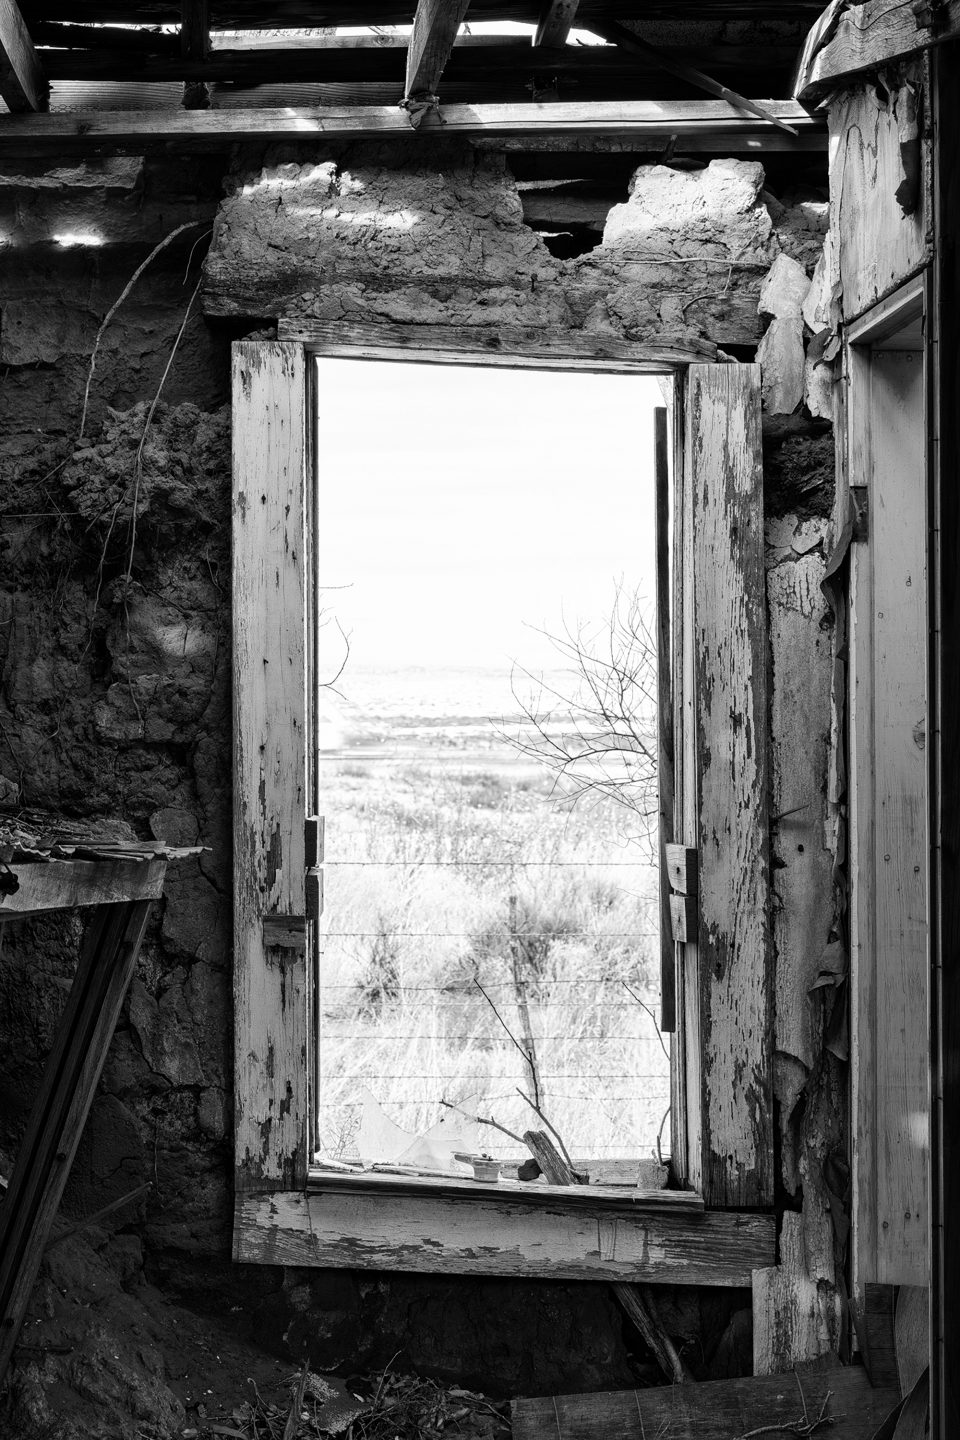 The New Mexico landscape seen through a broken window of a room in the collapsing State Line Motel built 1930 in Glenrio.